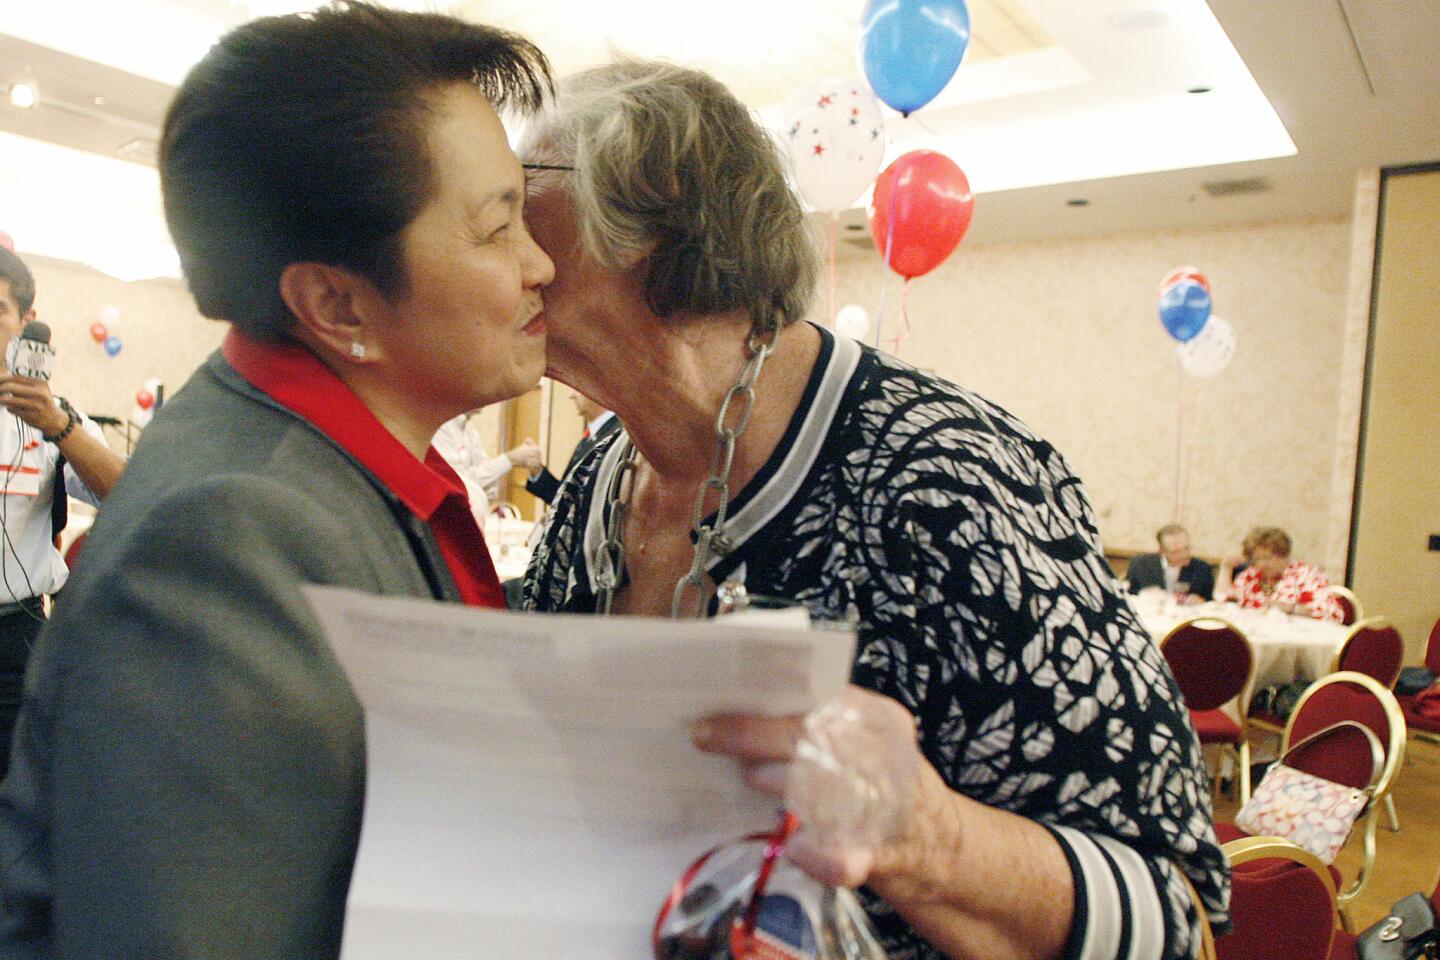 Former Glendale zoning administrator Edith Fuentes, left, receives a kiss from Joyce Ayvazi during her campaign kickoff for city council at Hilton in Glendale on Thursday, September 20, 2012.